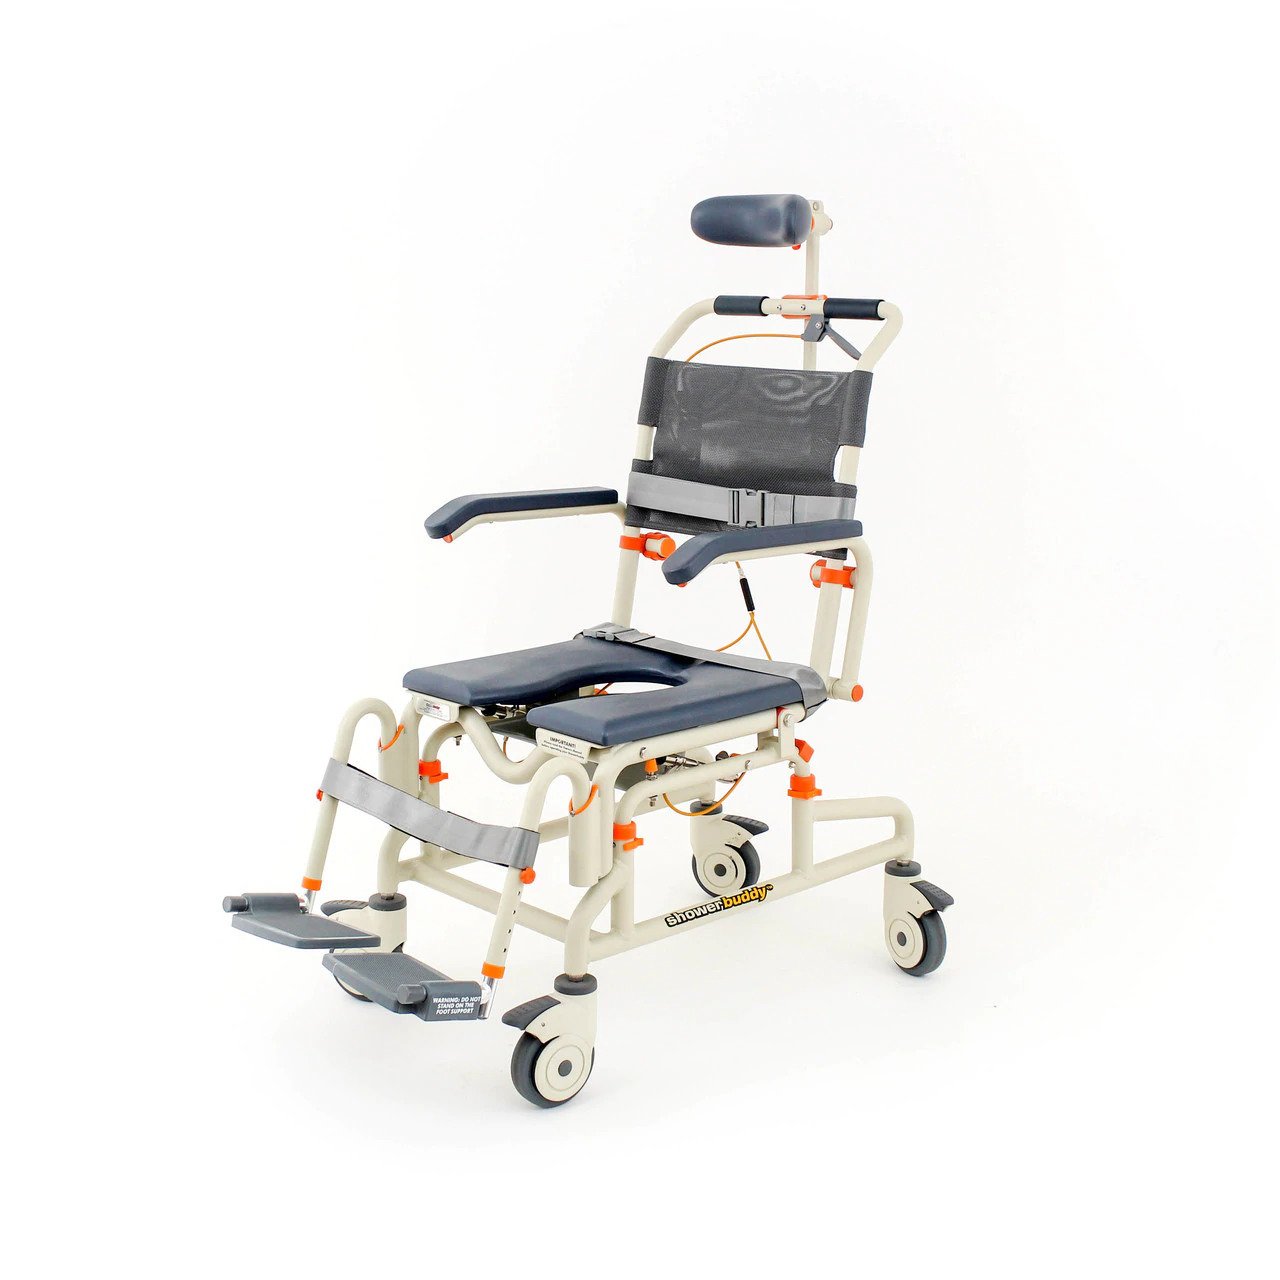 Shower Buddy RollIn Buddy Shower Commode Chair with Tilt